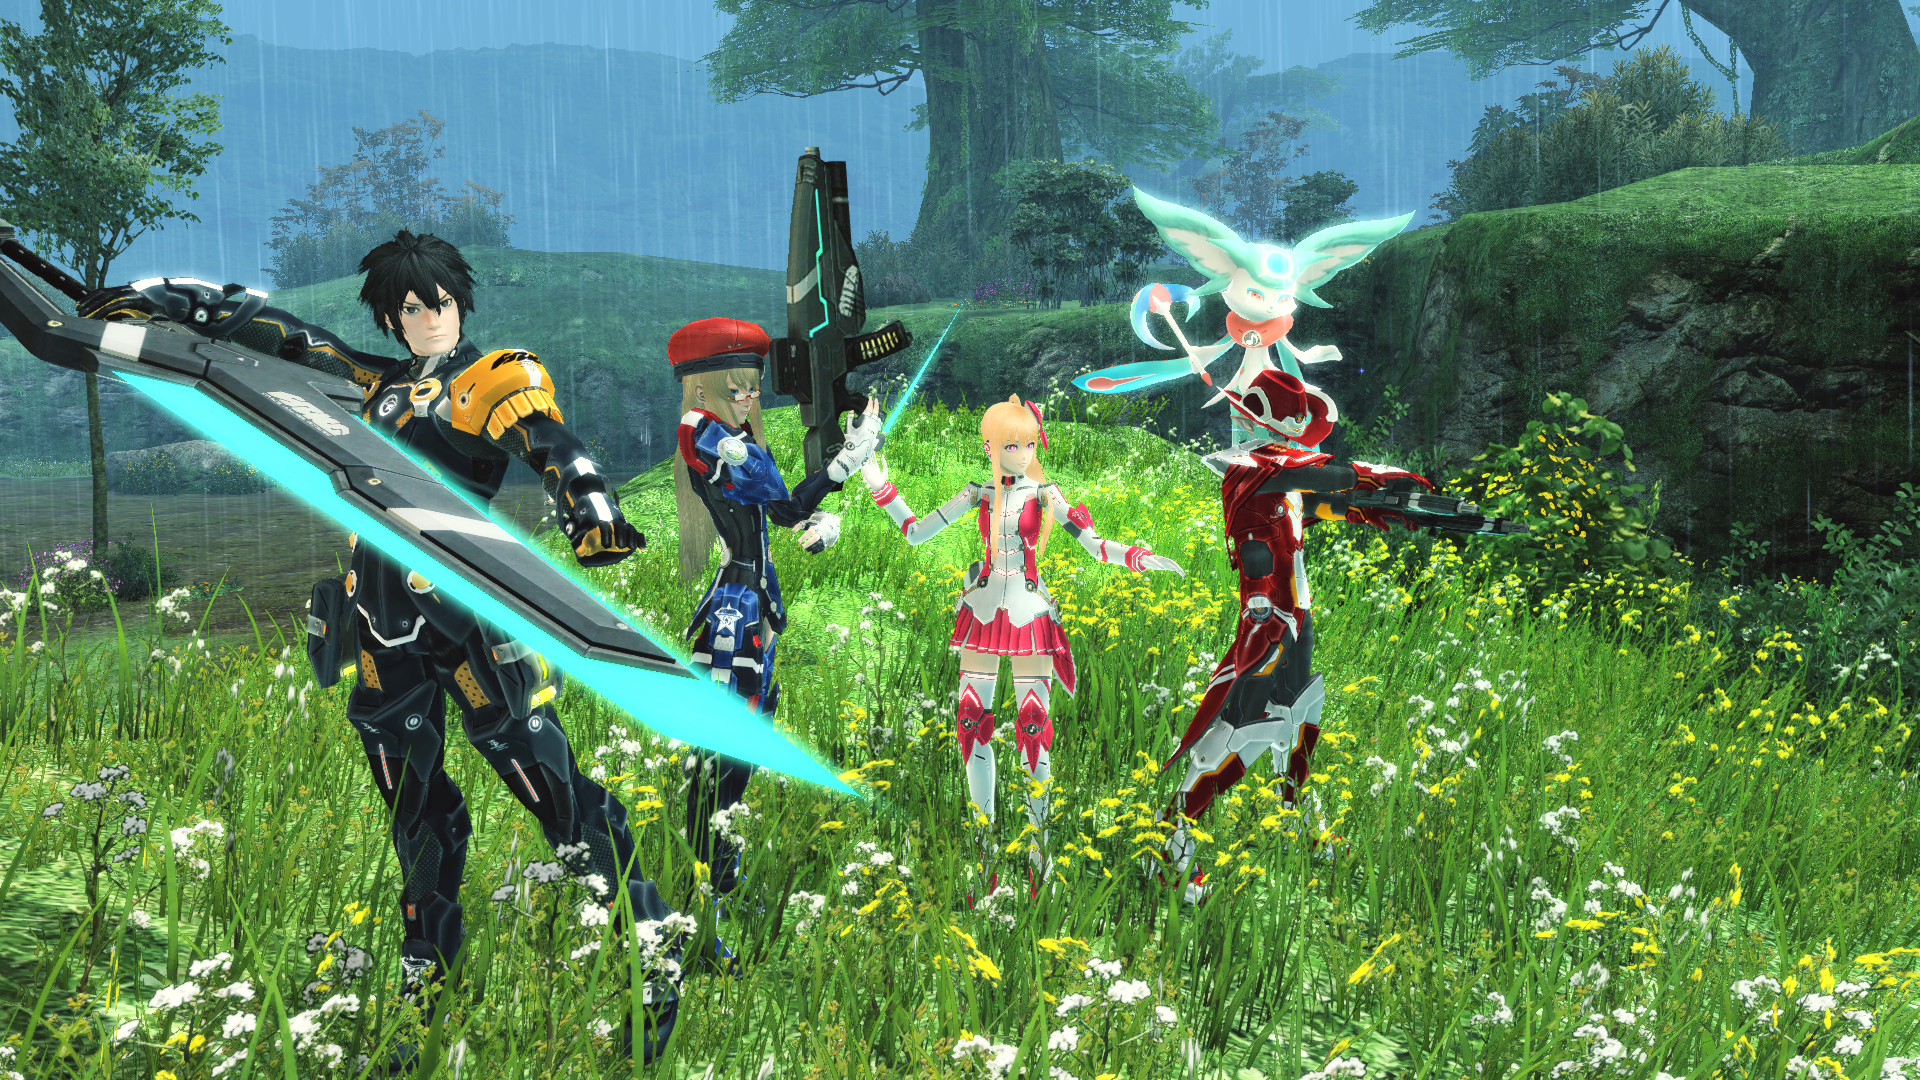 Sign Up for the Phantasy Star Online 2 Closed Beta Test Now!